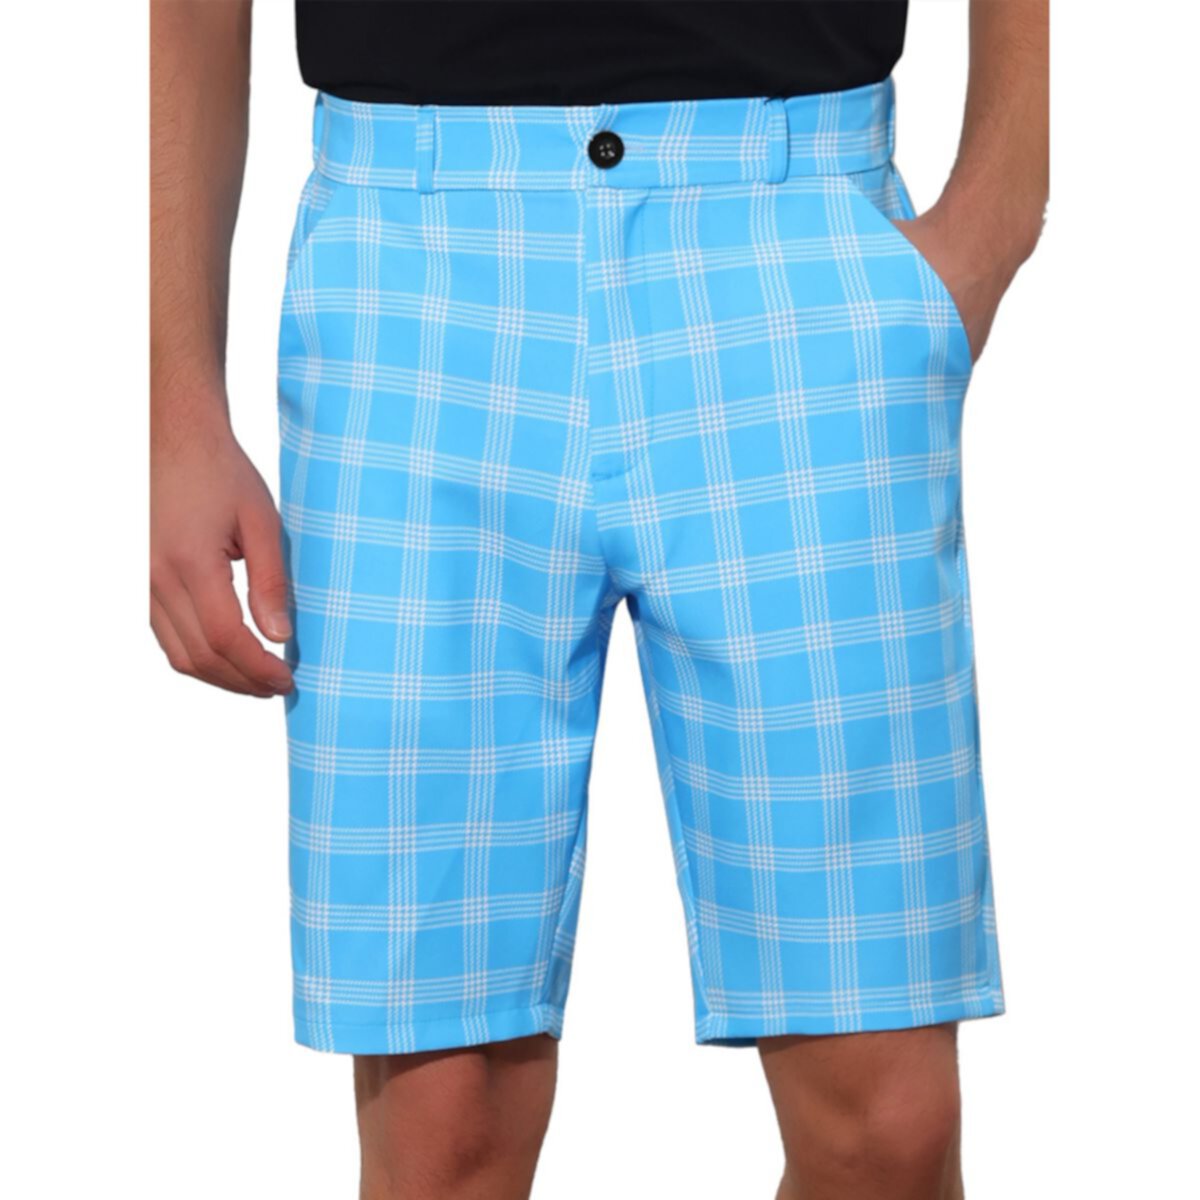 Plaid Shorts For Men's Flat Front Color Block Checked Shorts With Pockets Lars Amadeus